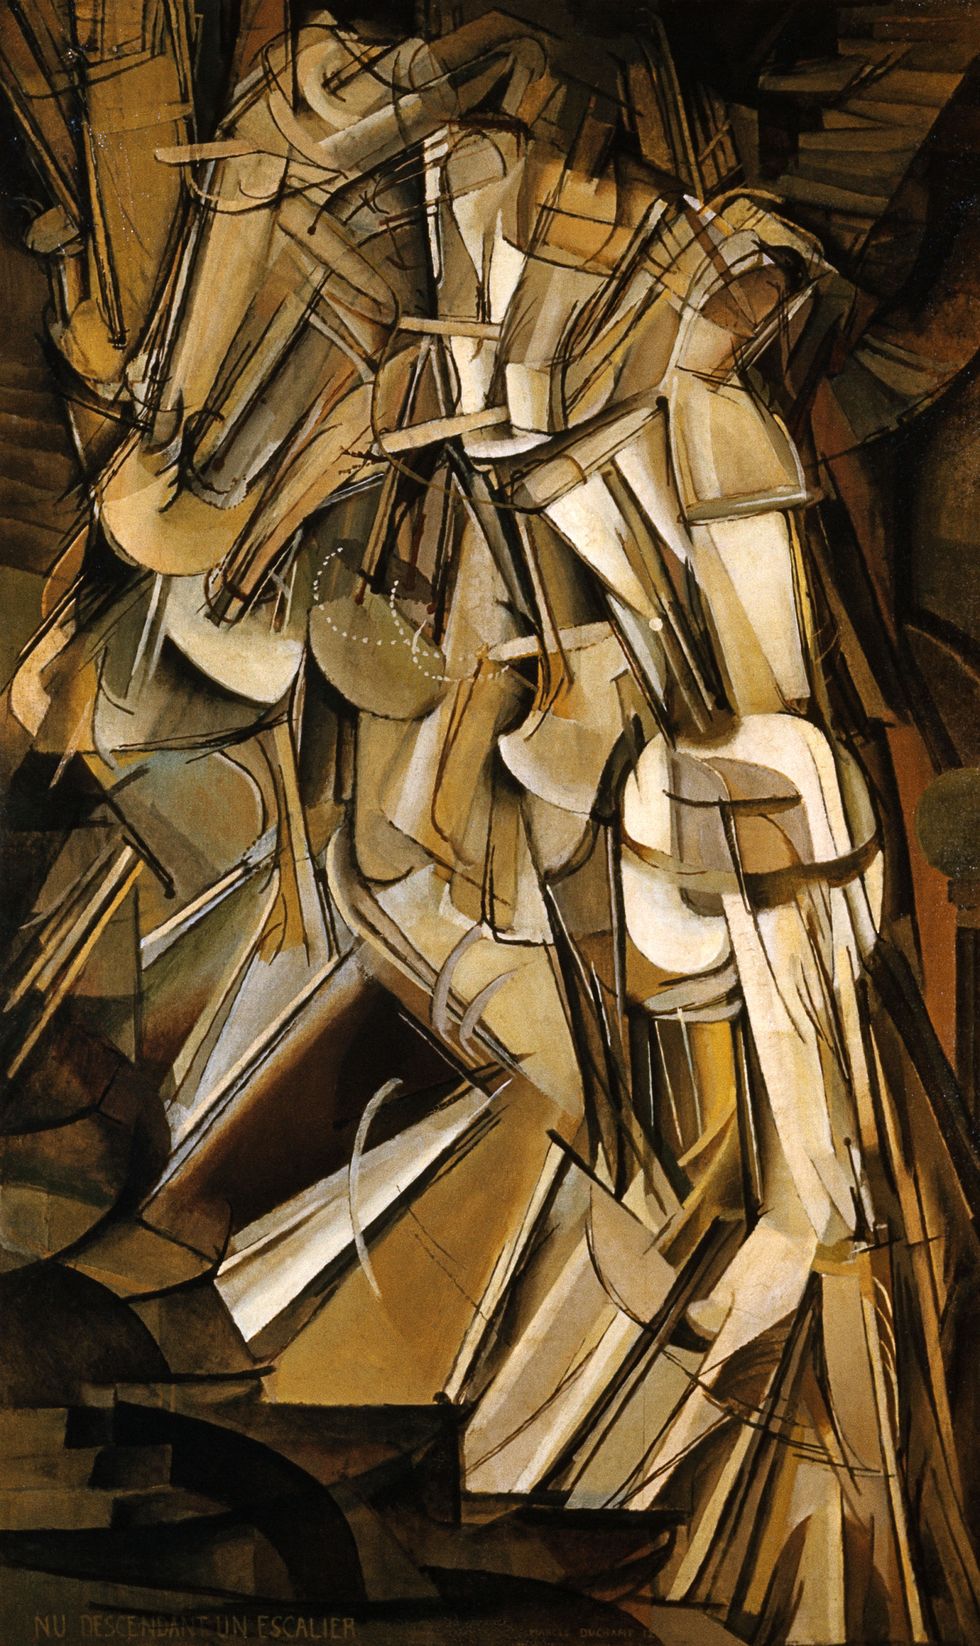 <p>Marcel Duchamp, the enigmatic father of Contemporary Art, shocked audiences with this Cubist masterwork.  The painting, ostensibly depicting a nude woman walking down a flight of stairs, has been so abstracted into geometric planes that it is impossible to determine any sense of concrete time or space.  With this work, Duchamp pushed Cubism farther than Picasso, paving the way for further explorations into abstraction, a main thrust of 20th century painting.</p>